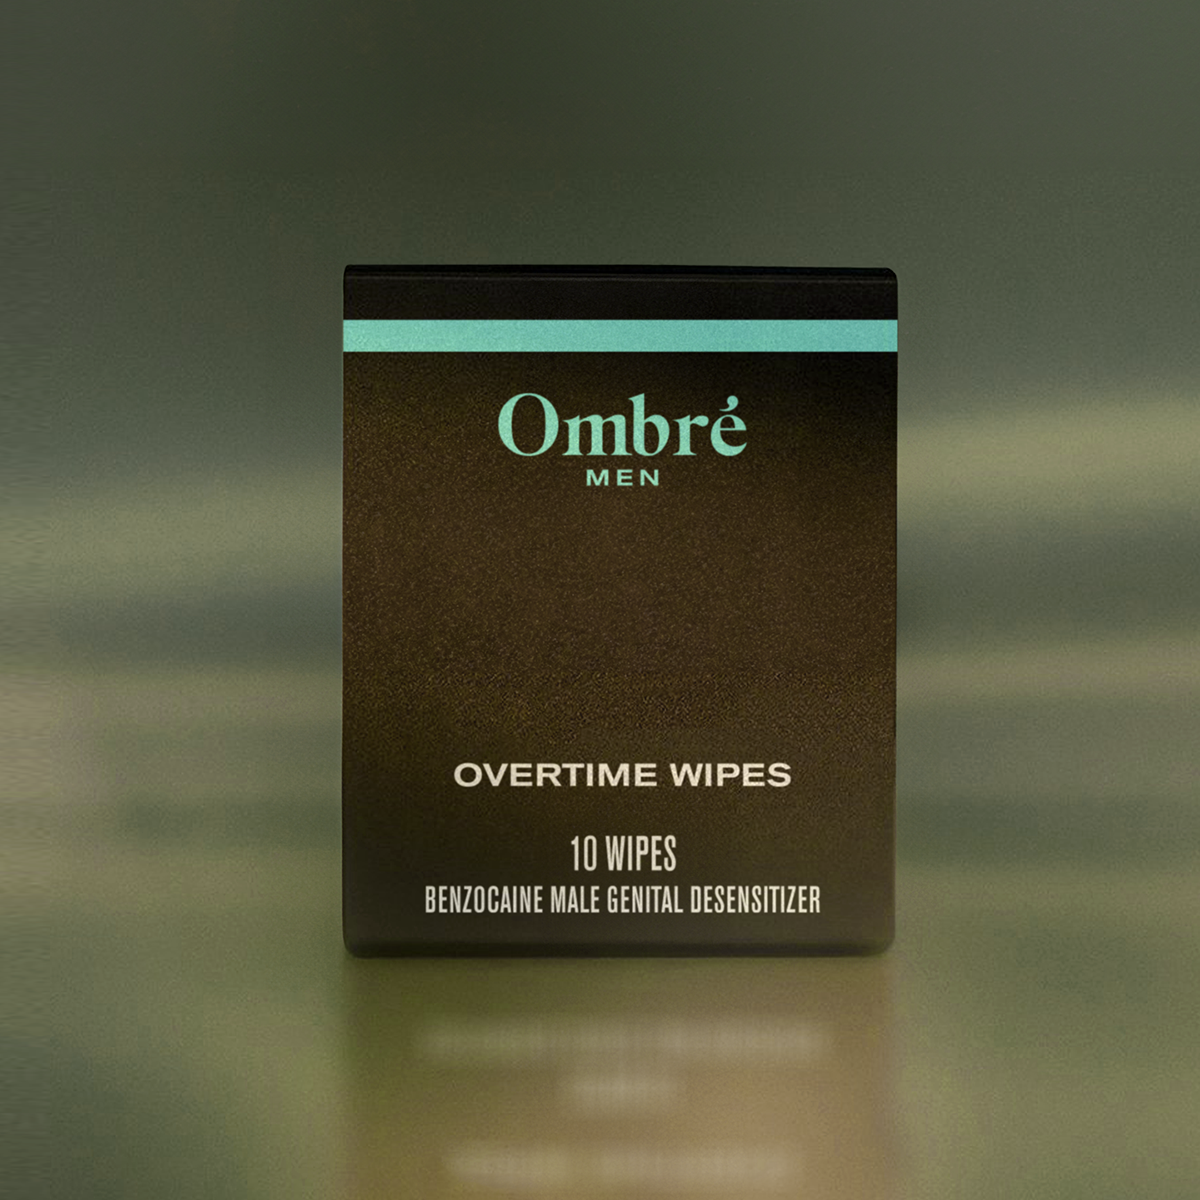 Overtime Wipes by Ombré Men